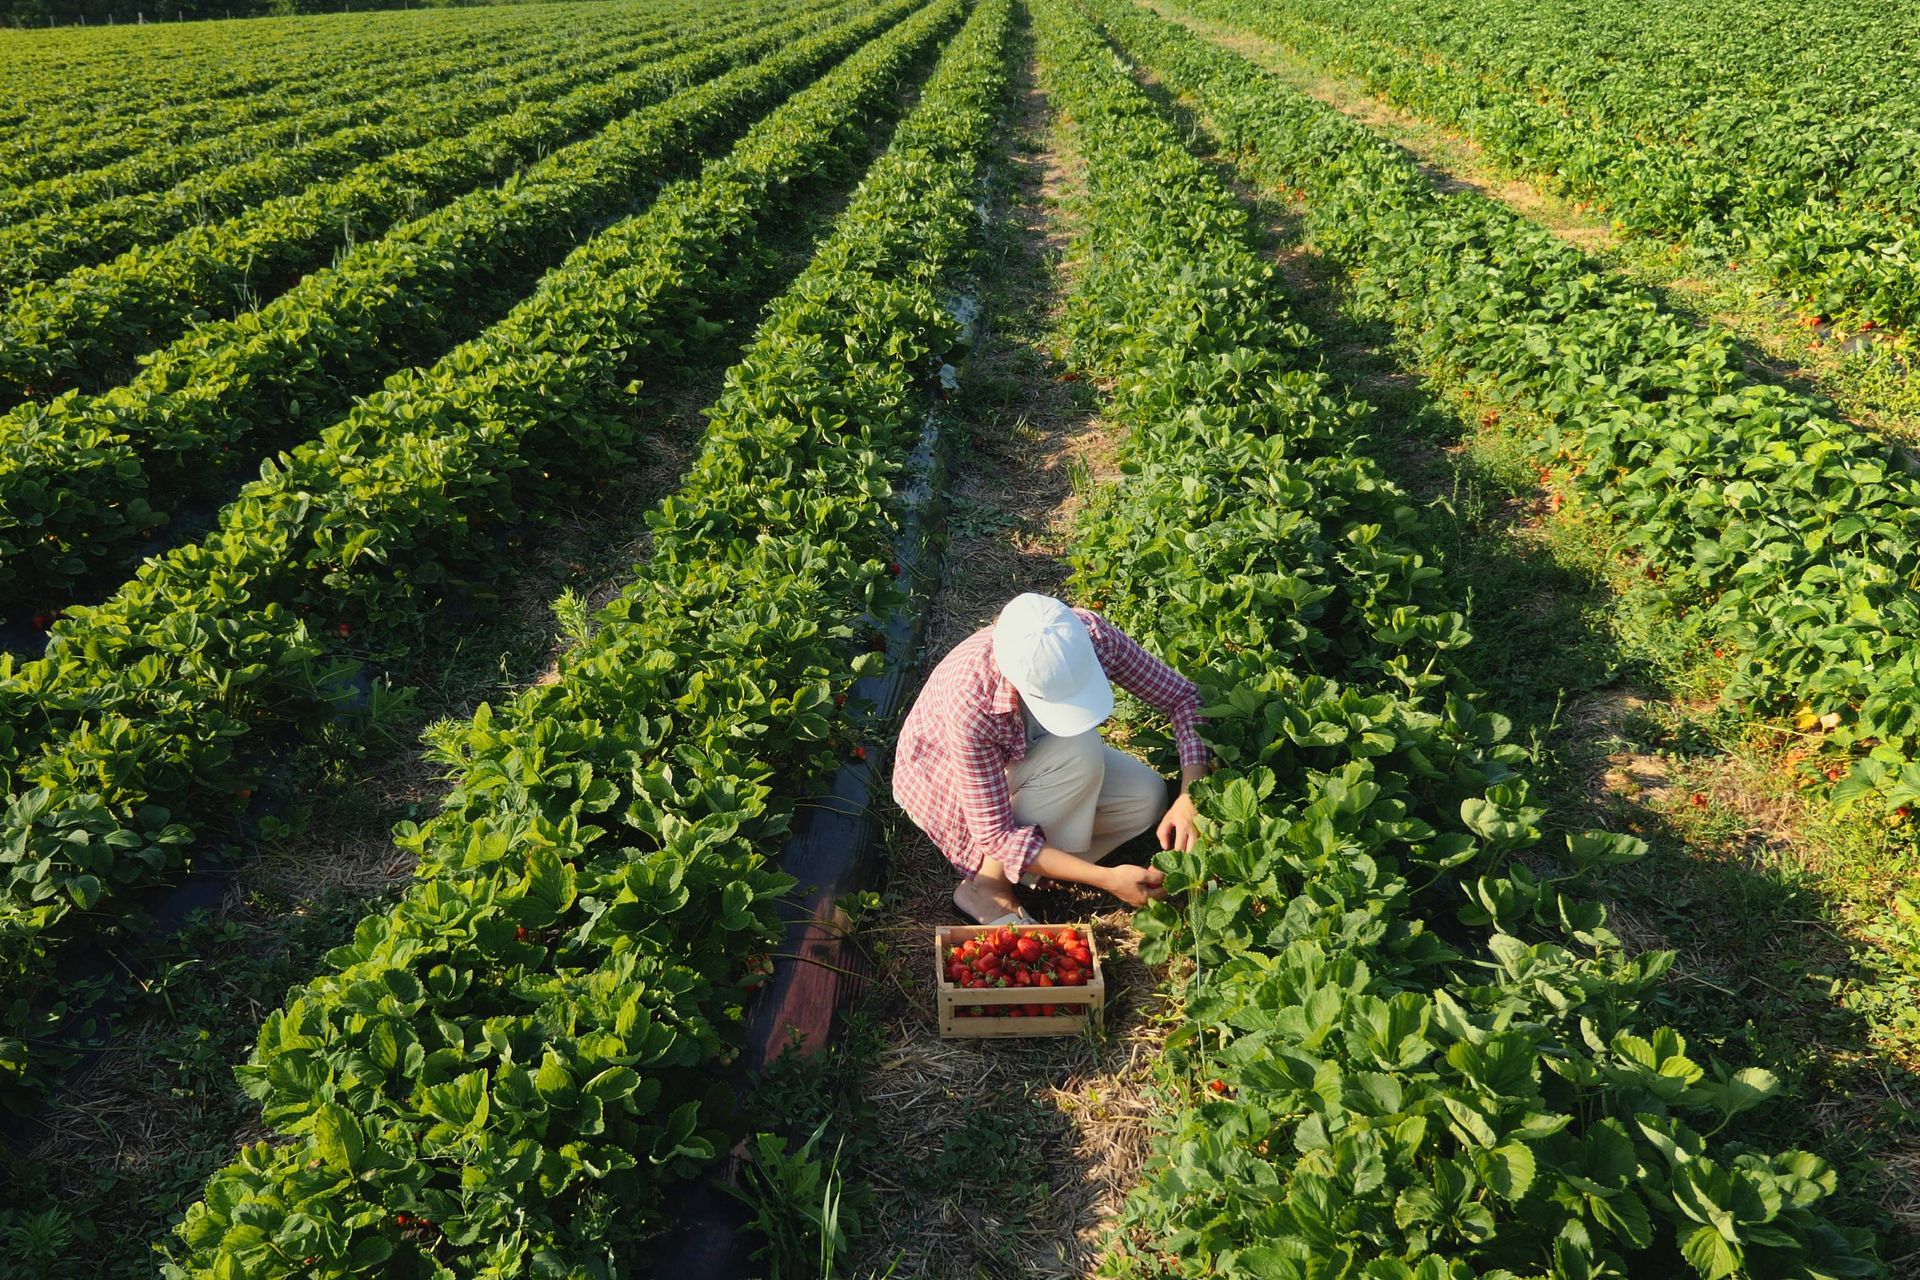 Image of a producer harvesting berries in a field